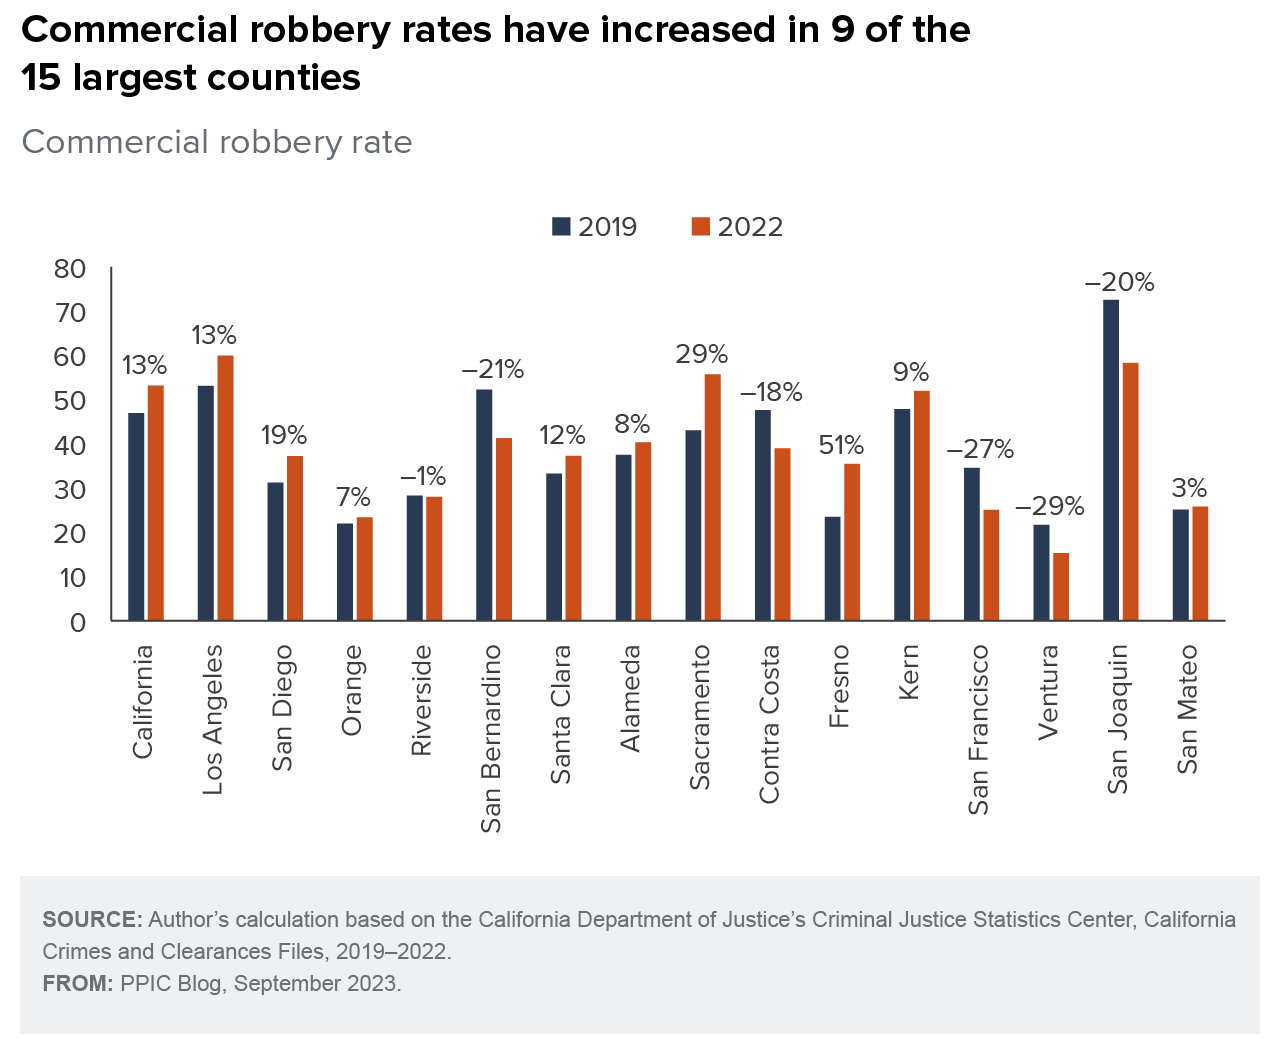 figure - Commercial robbery rates have increased in 9 of the 15 largest counties